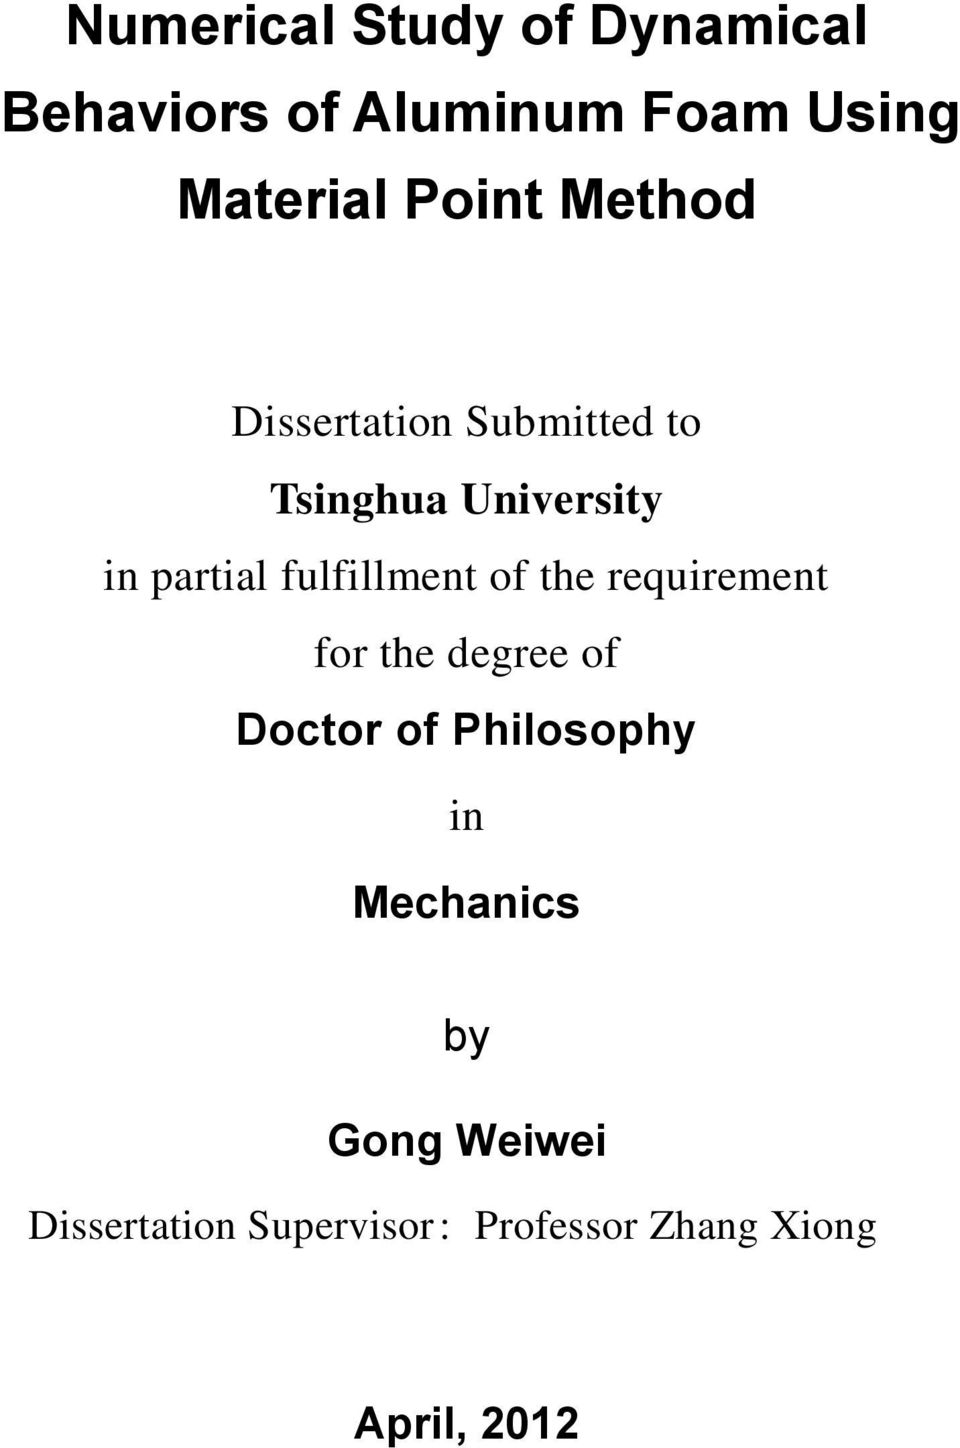 fulfillment of the requirement for the degree of Doctor of Philosophy in